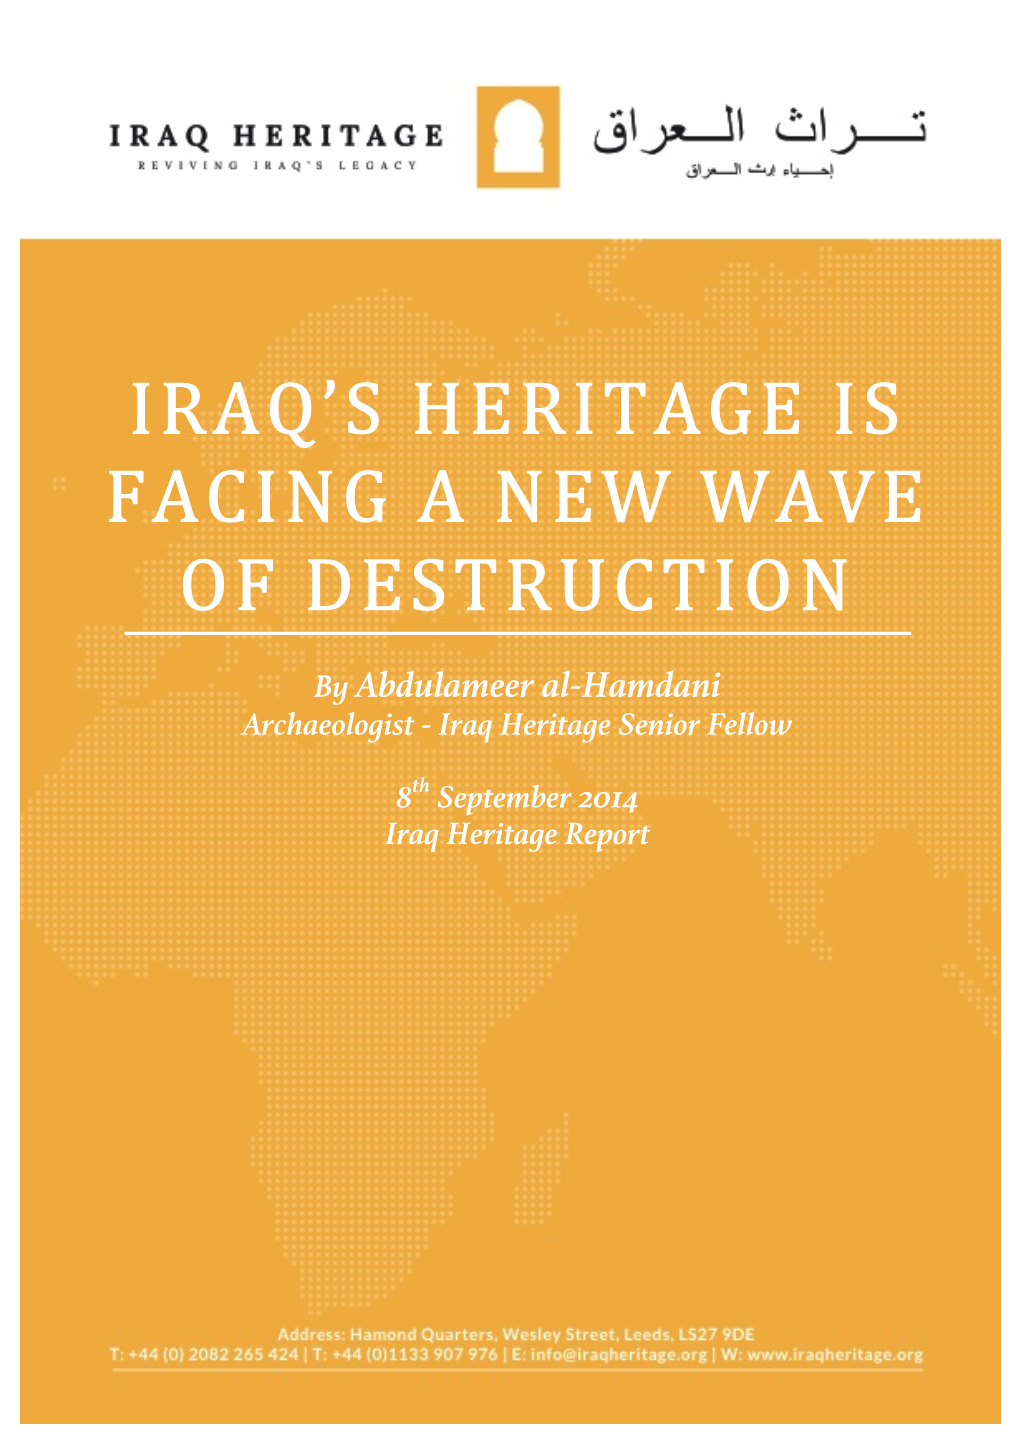 Iraq's Heritage Is Facing a New Wave of Destruction